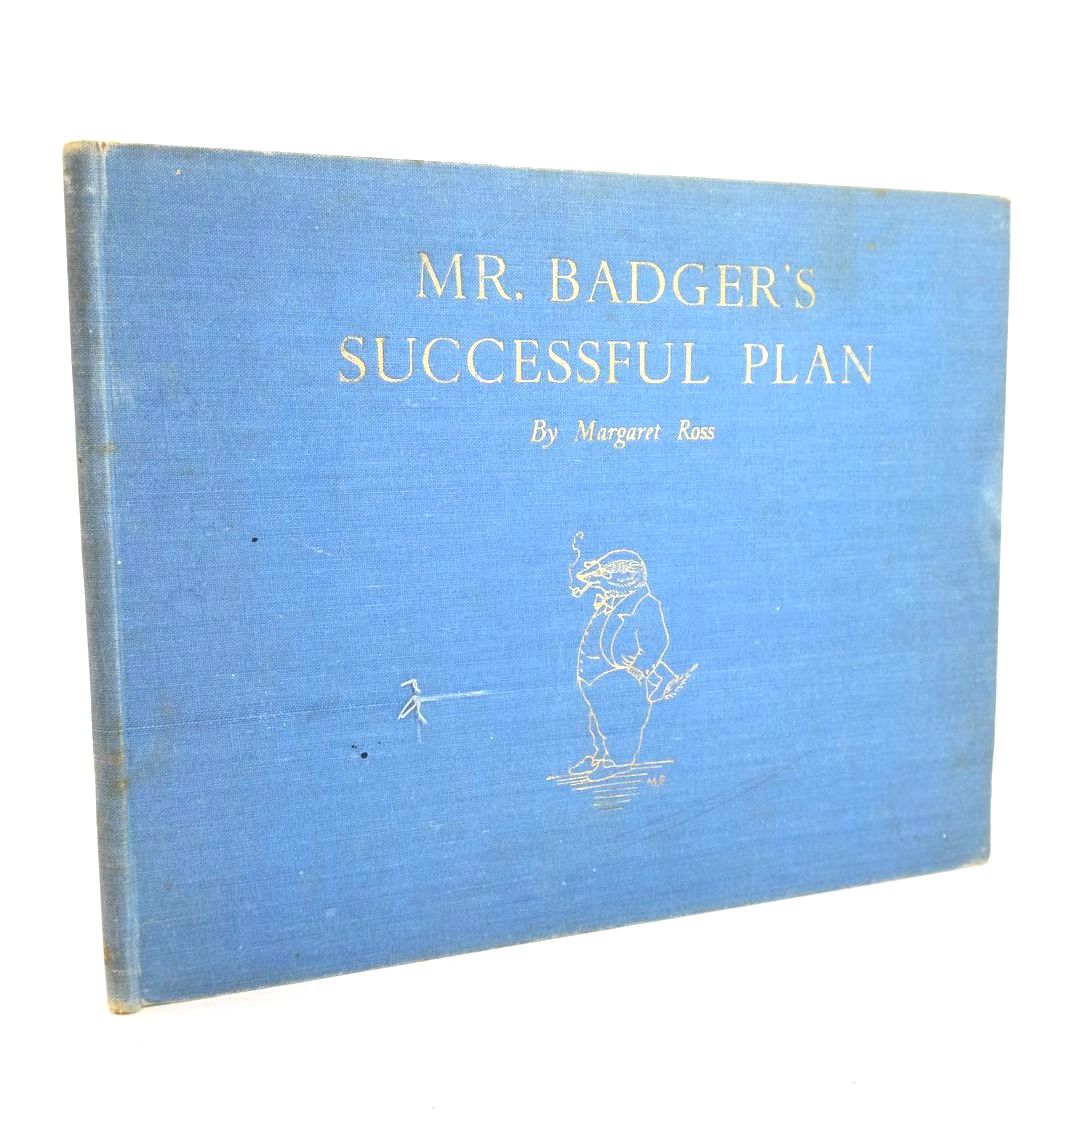 Photo of MR. BADGER'S SUCCESSFUL PLAN written by Ross, Margaret illustrated by Ross, Margaret published by The Museum Press, The Soho Gallery Ltd (STOCK CODE: 1327763)  for sale by Stella & Rose's Books